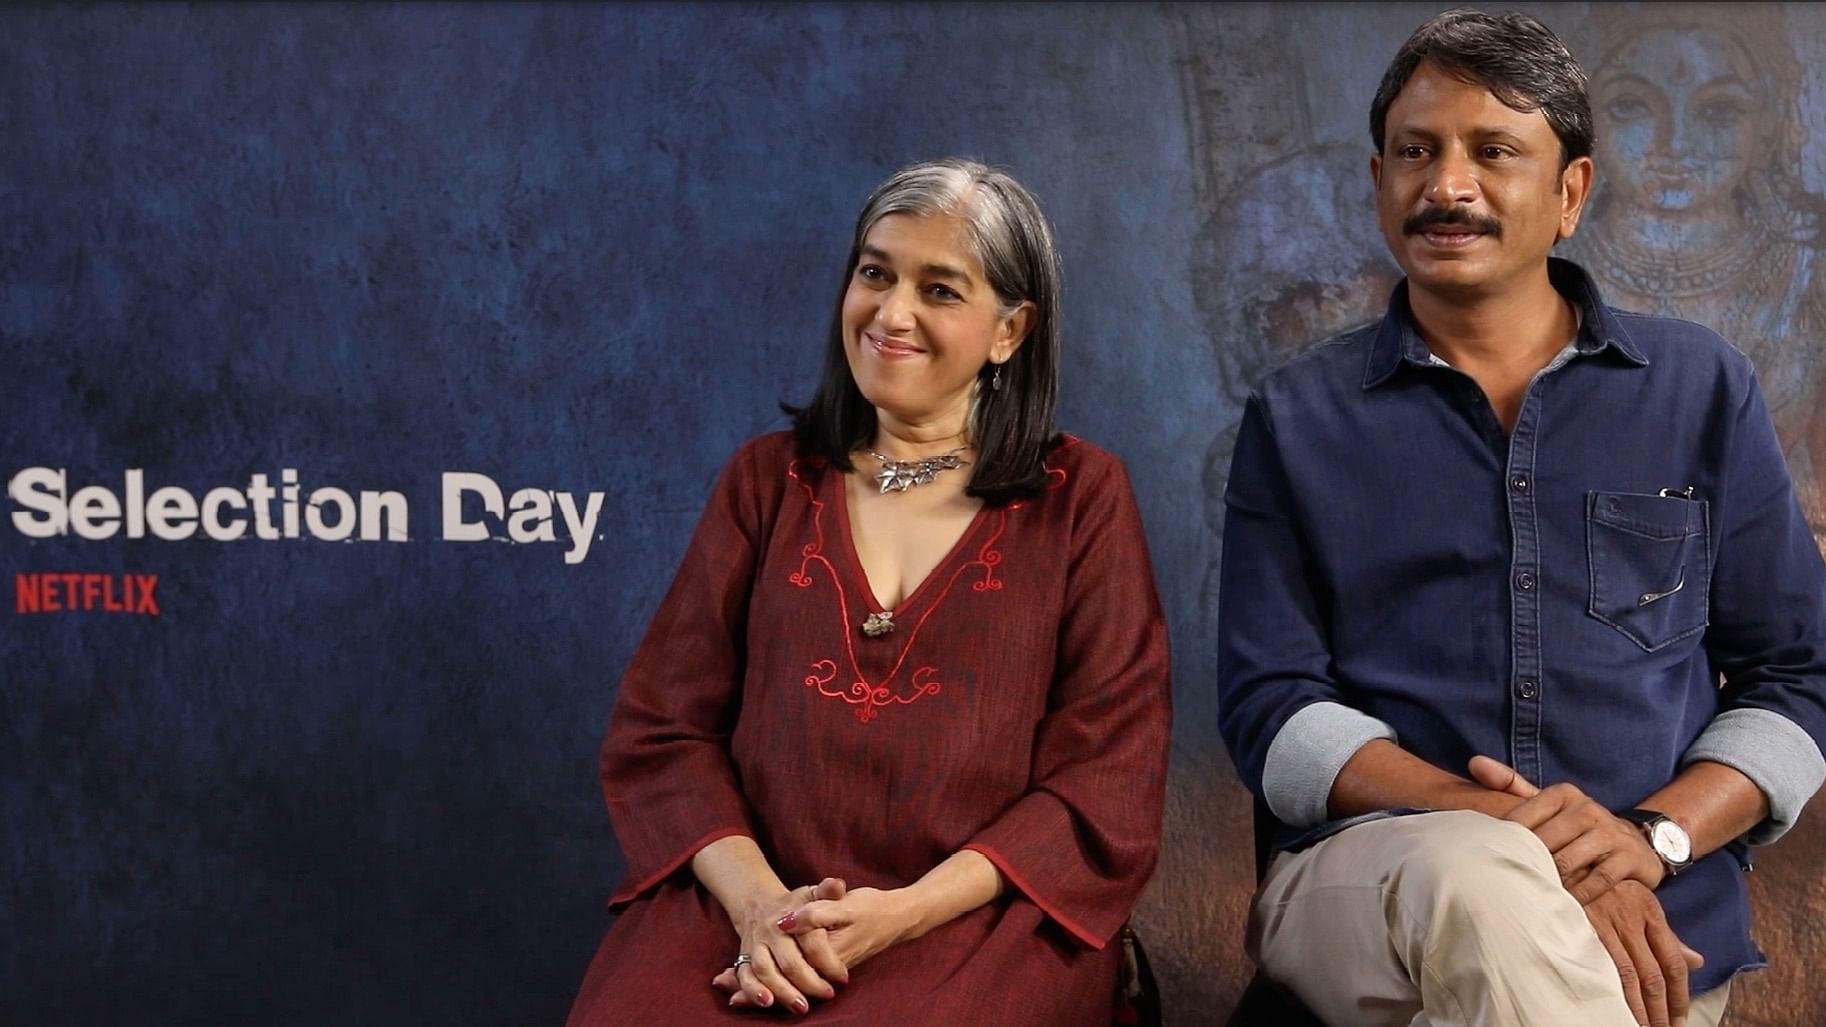 <i>Selection Day</i> actors Ratna Pathak Shah and Rajesh Tailang talk about their new show.